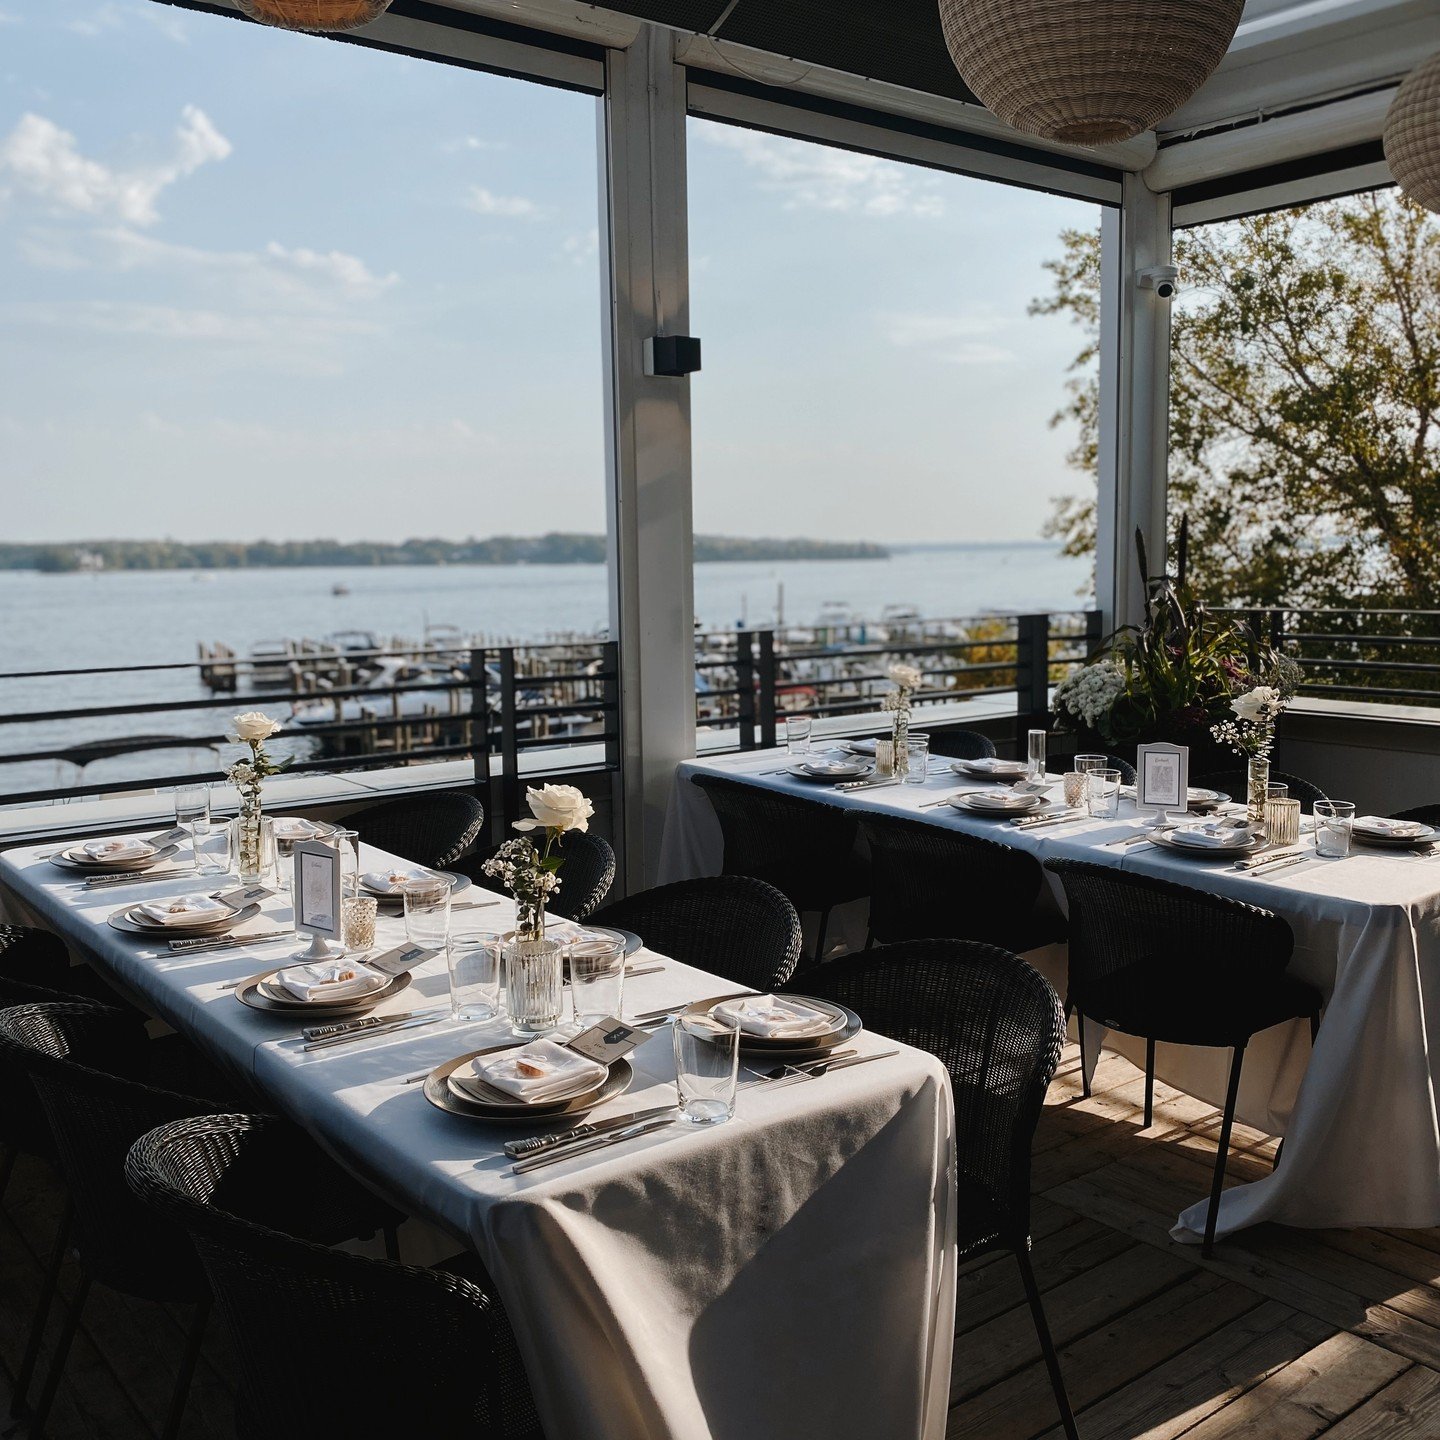 Under the stars, by the water &ndash; a private dining experience with nature's finest backdrop.
Whatever your reason to party&hellip; you will be sure to wow your guests with access to the only Rooftop on Lake Minnetonka. Features a private bar, and